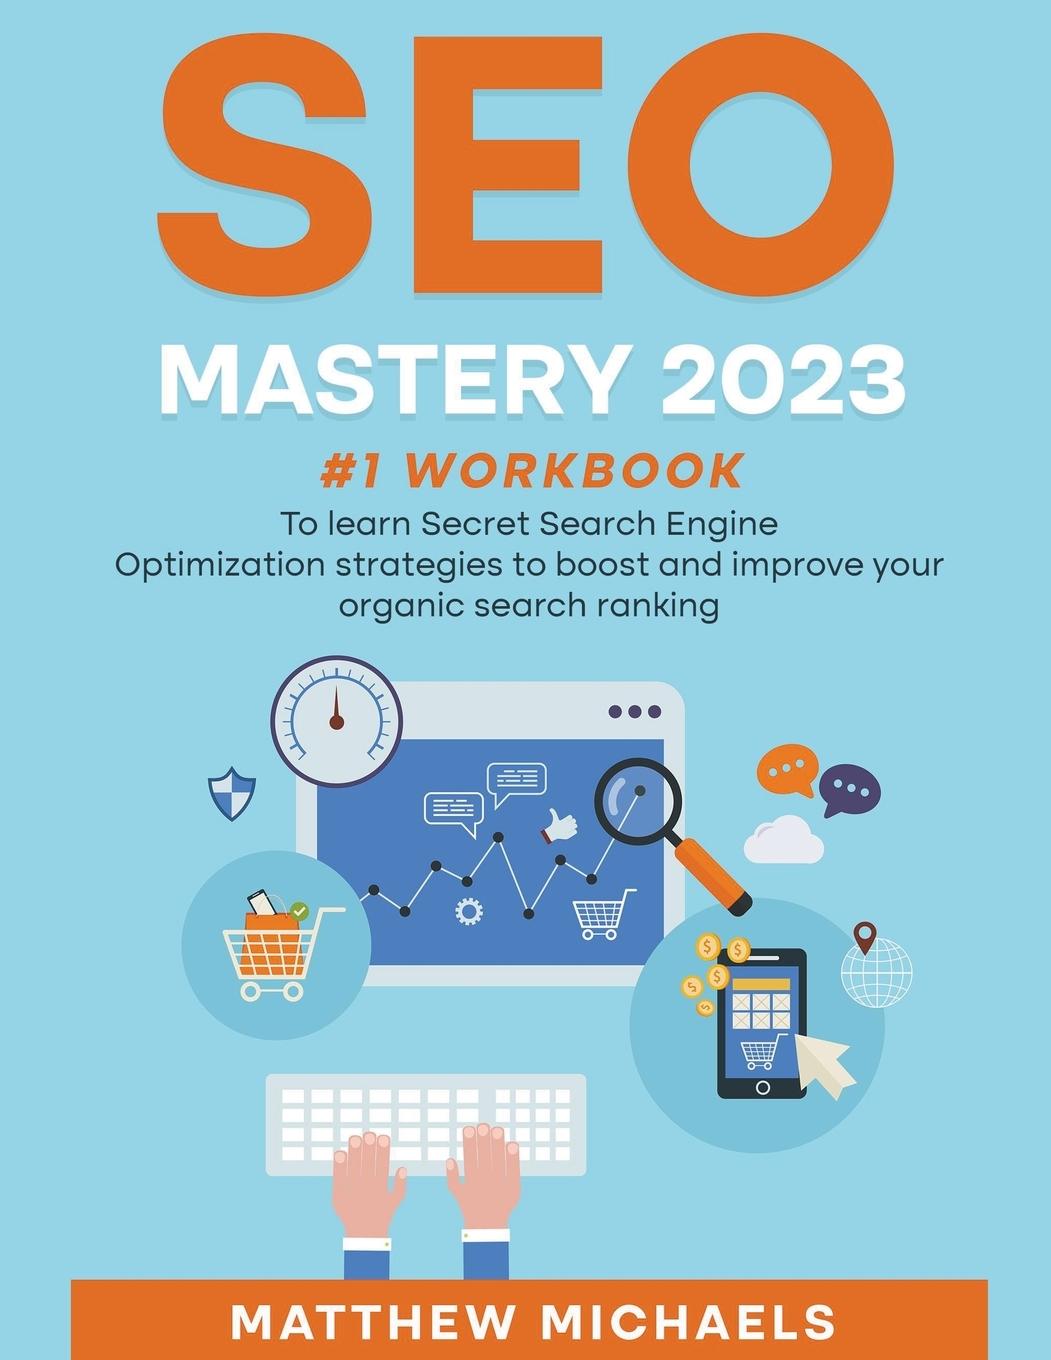 Book SEO Mastery 2023 #1 Workbook to Learn Secret Search Engine Optimization Strategies to Boost and Improve Your Organic Search Ranking 